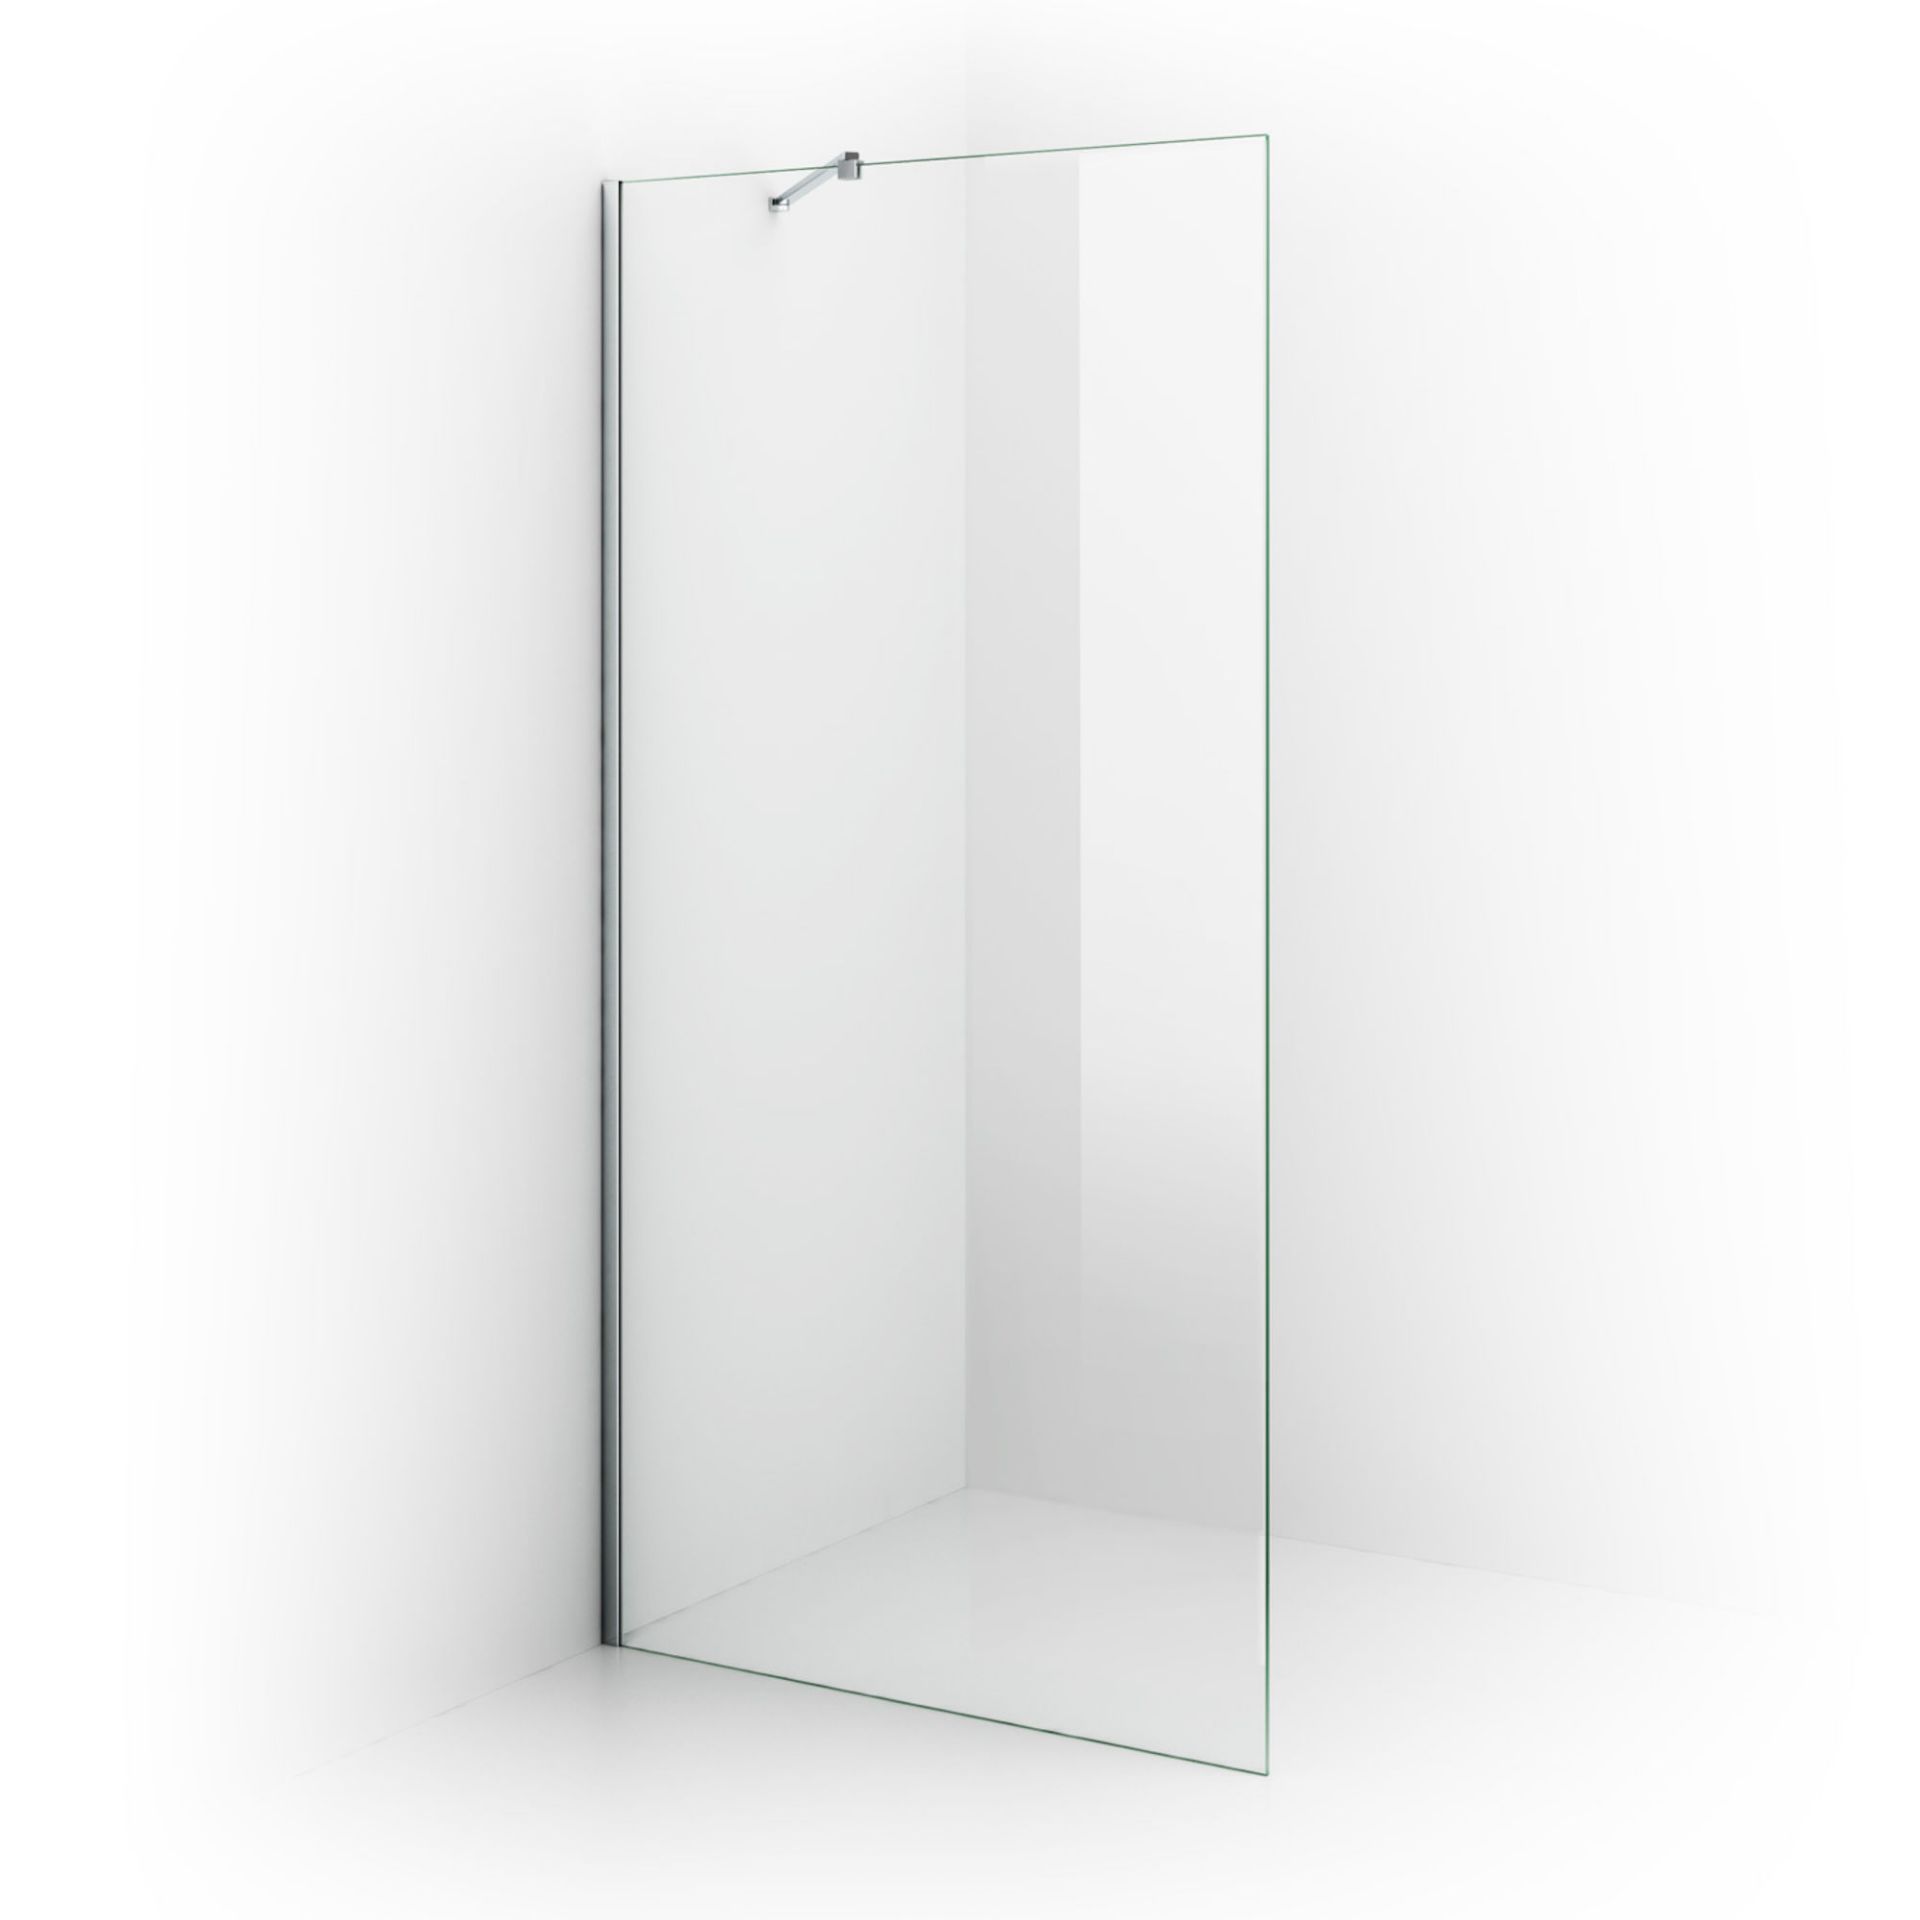 (MW25) 900mm - 8mm - Premium EasyClean Wetroom Panel. RRP £349.99. 8mm EasyClean glass - Our glass - Image 3 of 3